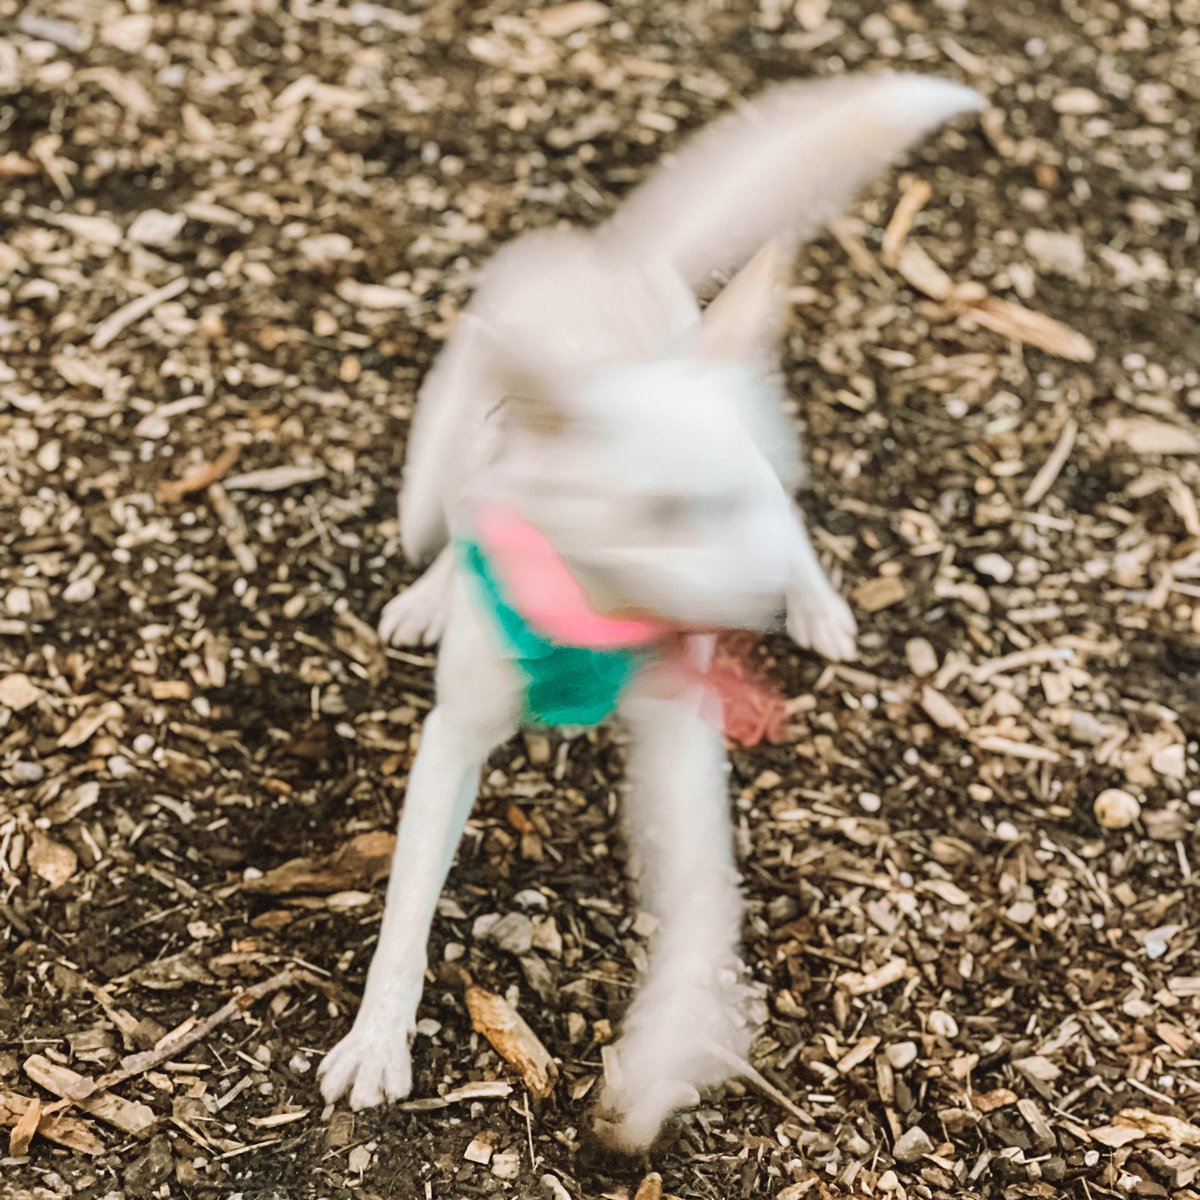 Me trying to get a halfway decent picture at the dog park